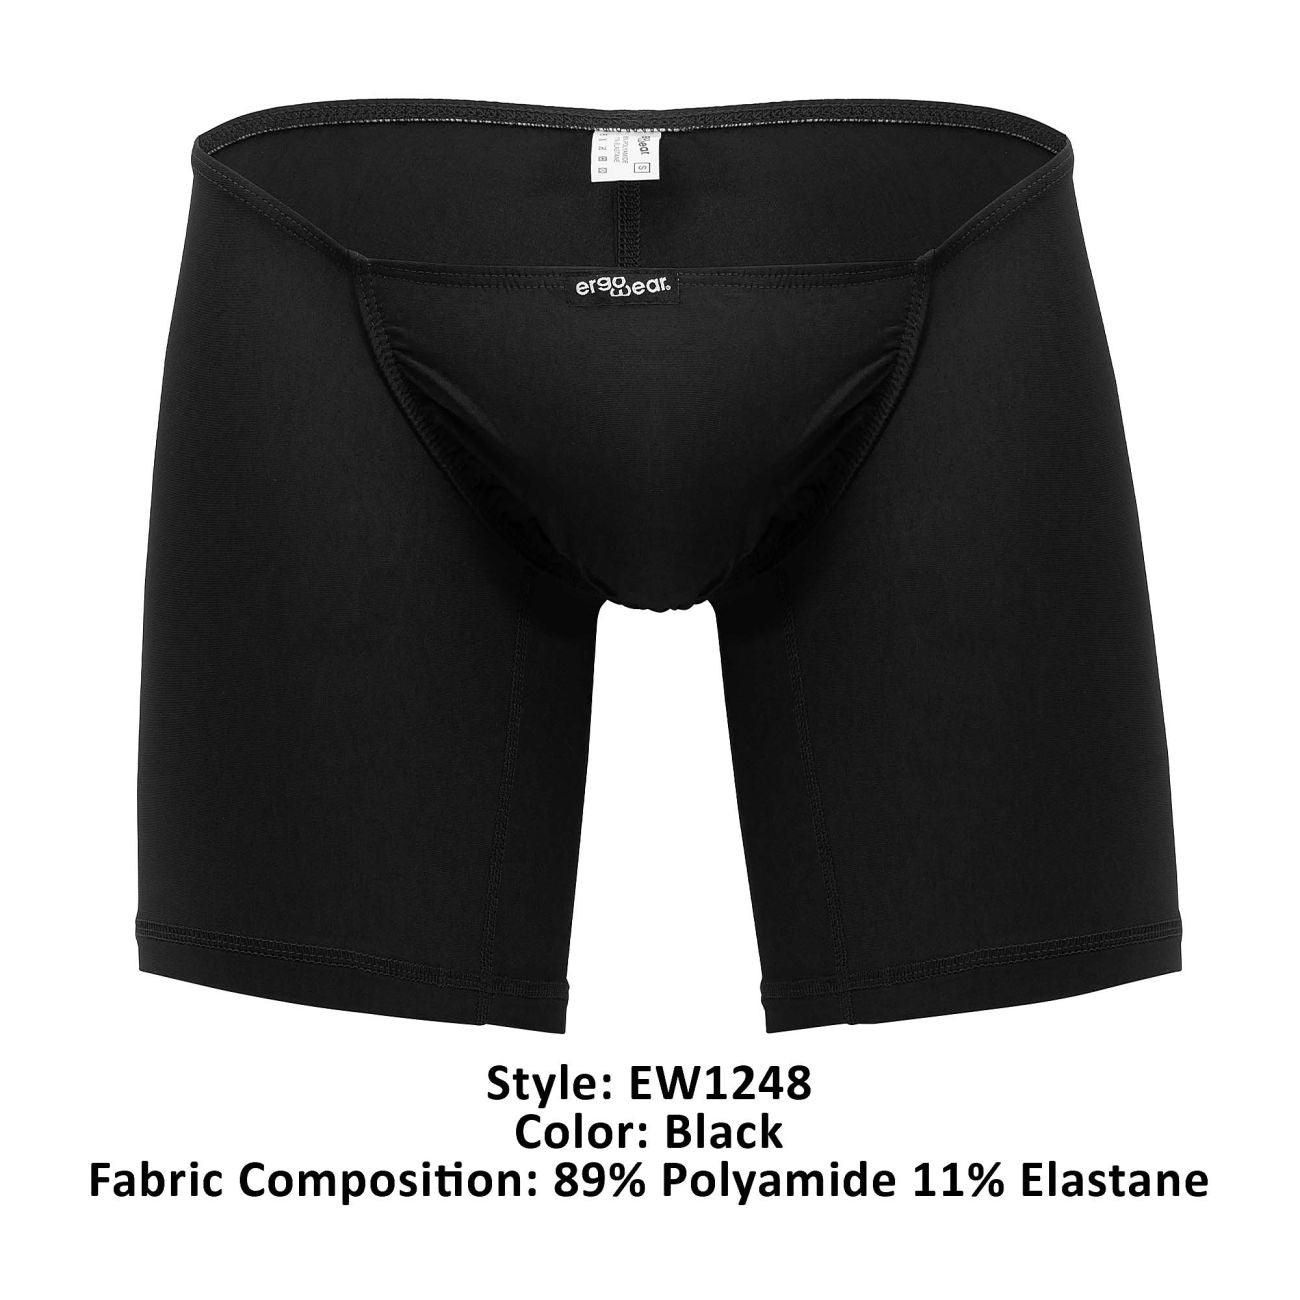 image of product,FEEL GR8 Boxer Briefs - SEXYEONE